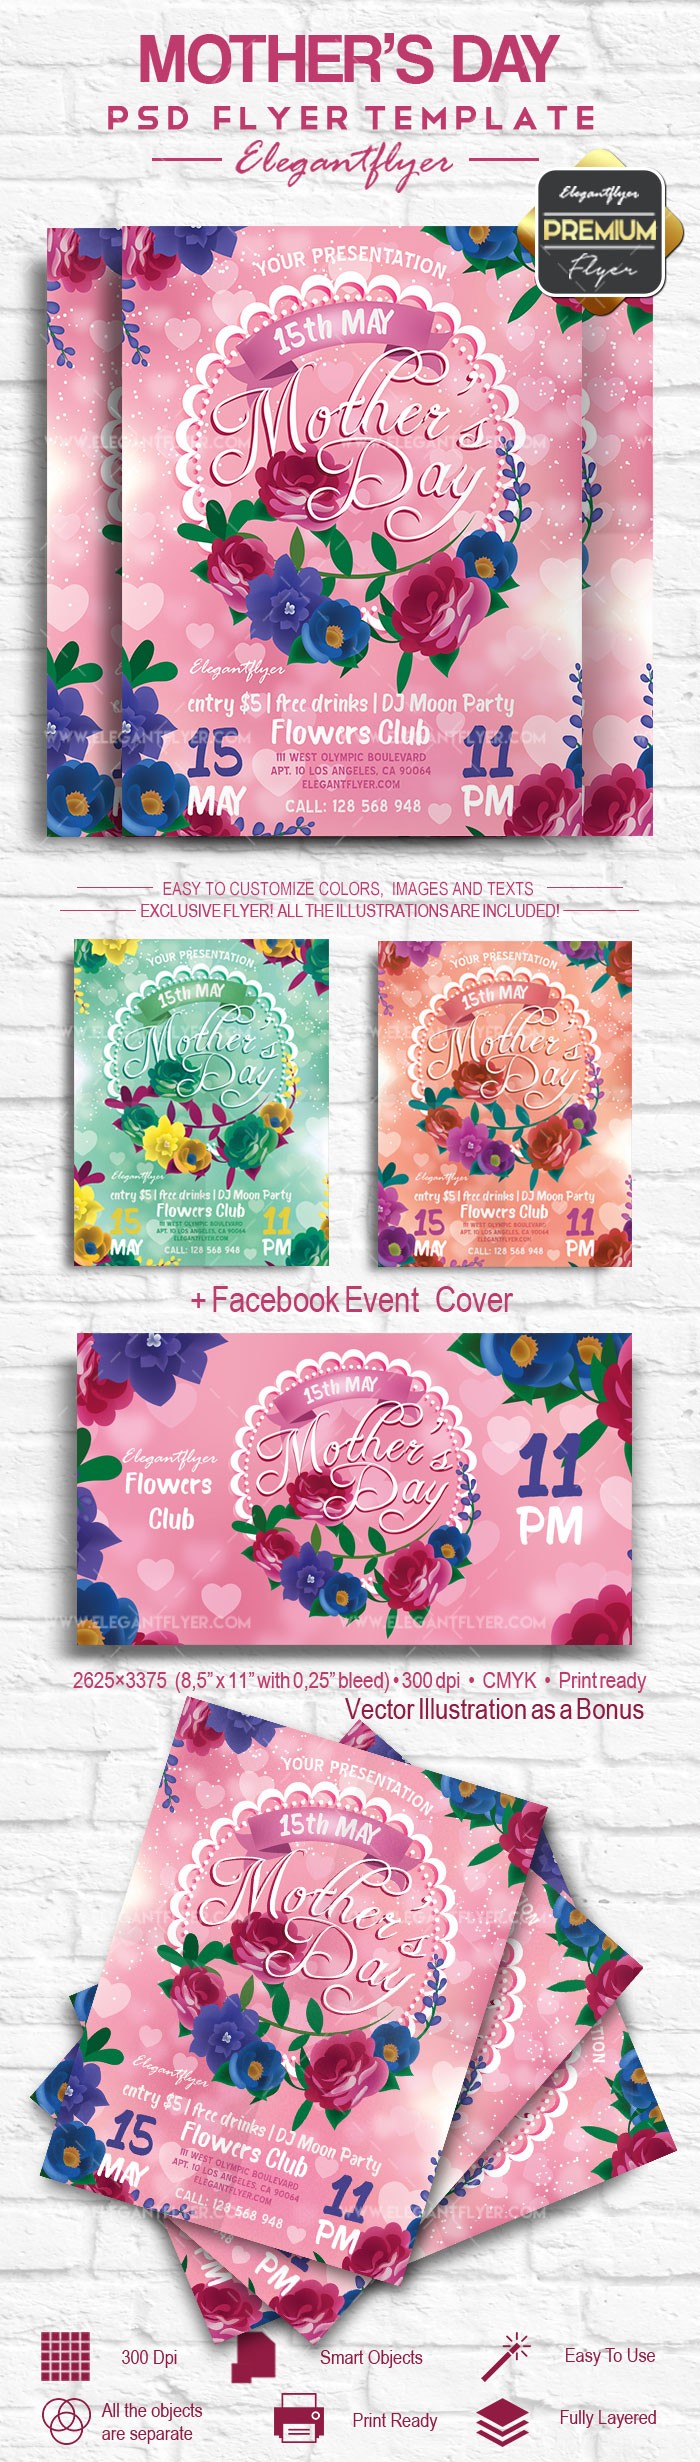 Pink Floral & Plants Illustrated Mother's Day Premium Flyer Template PSD